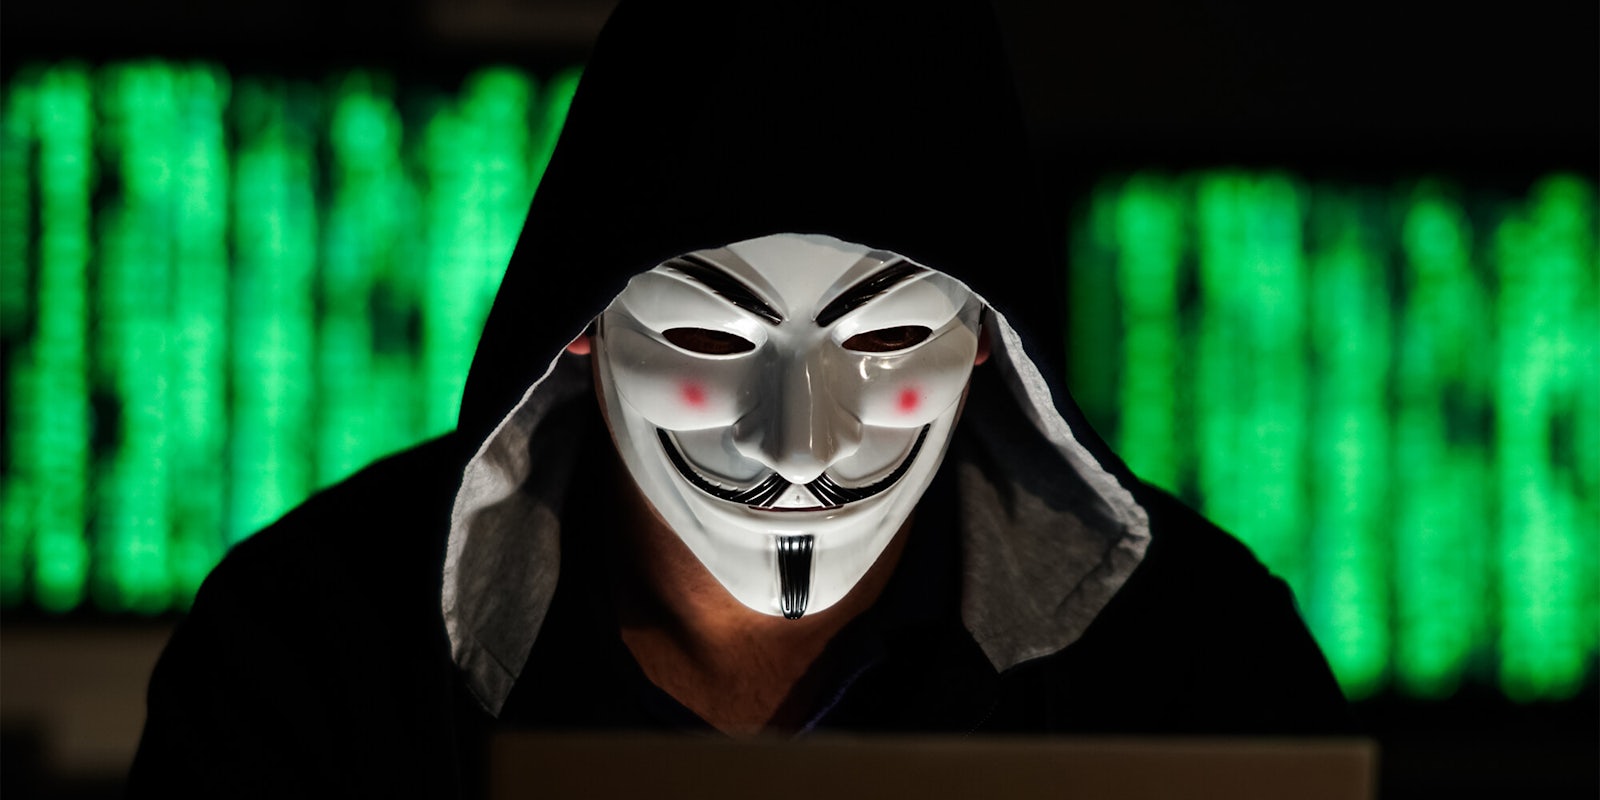 person wearing guy fawkes mask and hoody at computer